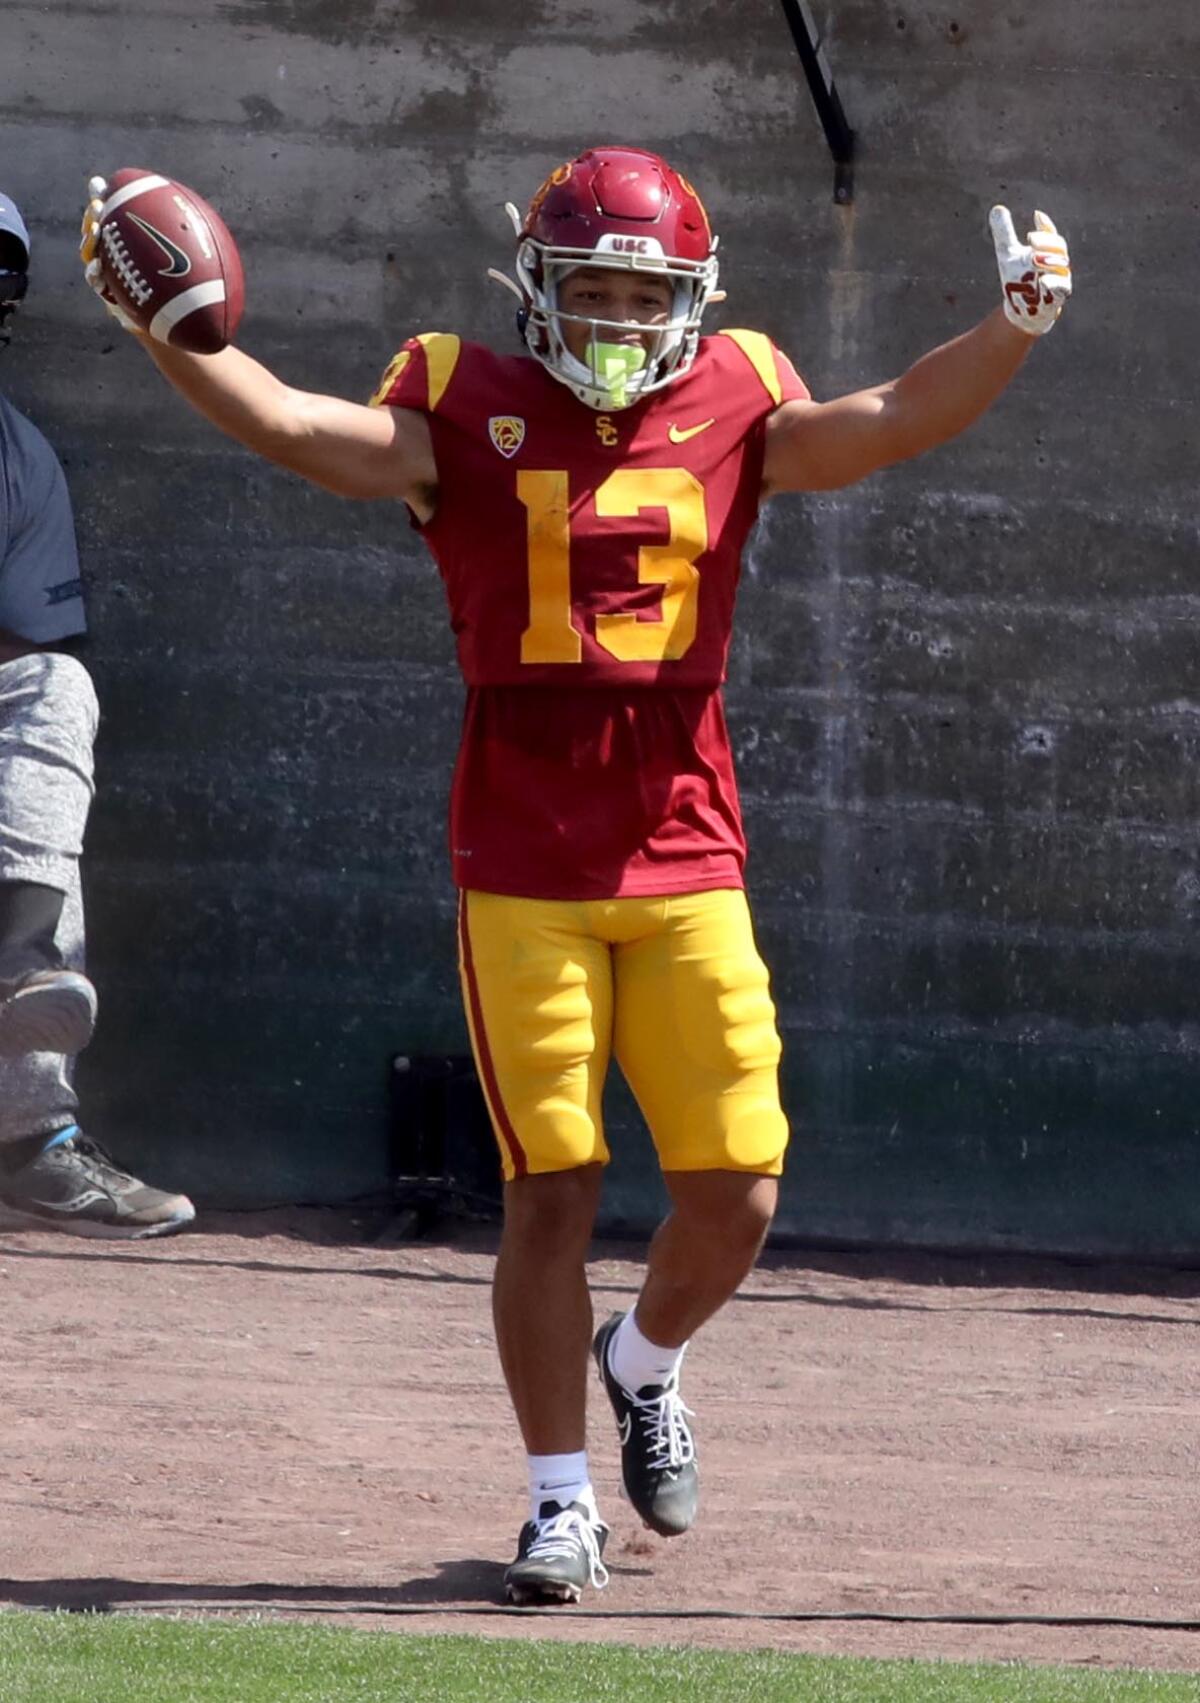 Receiver Michael Jackson III raises triumphant arms after scoring a touchdown during USC's spring game.